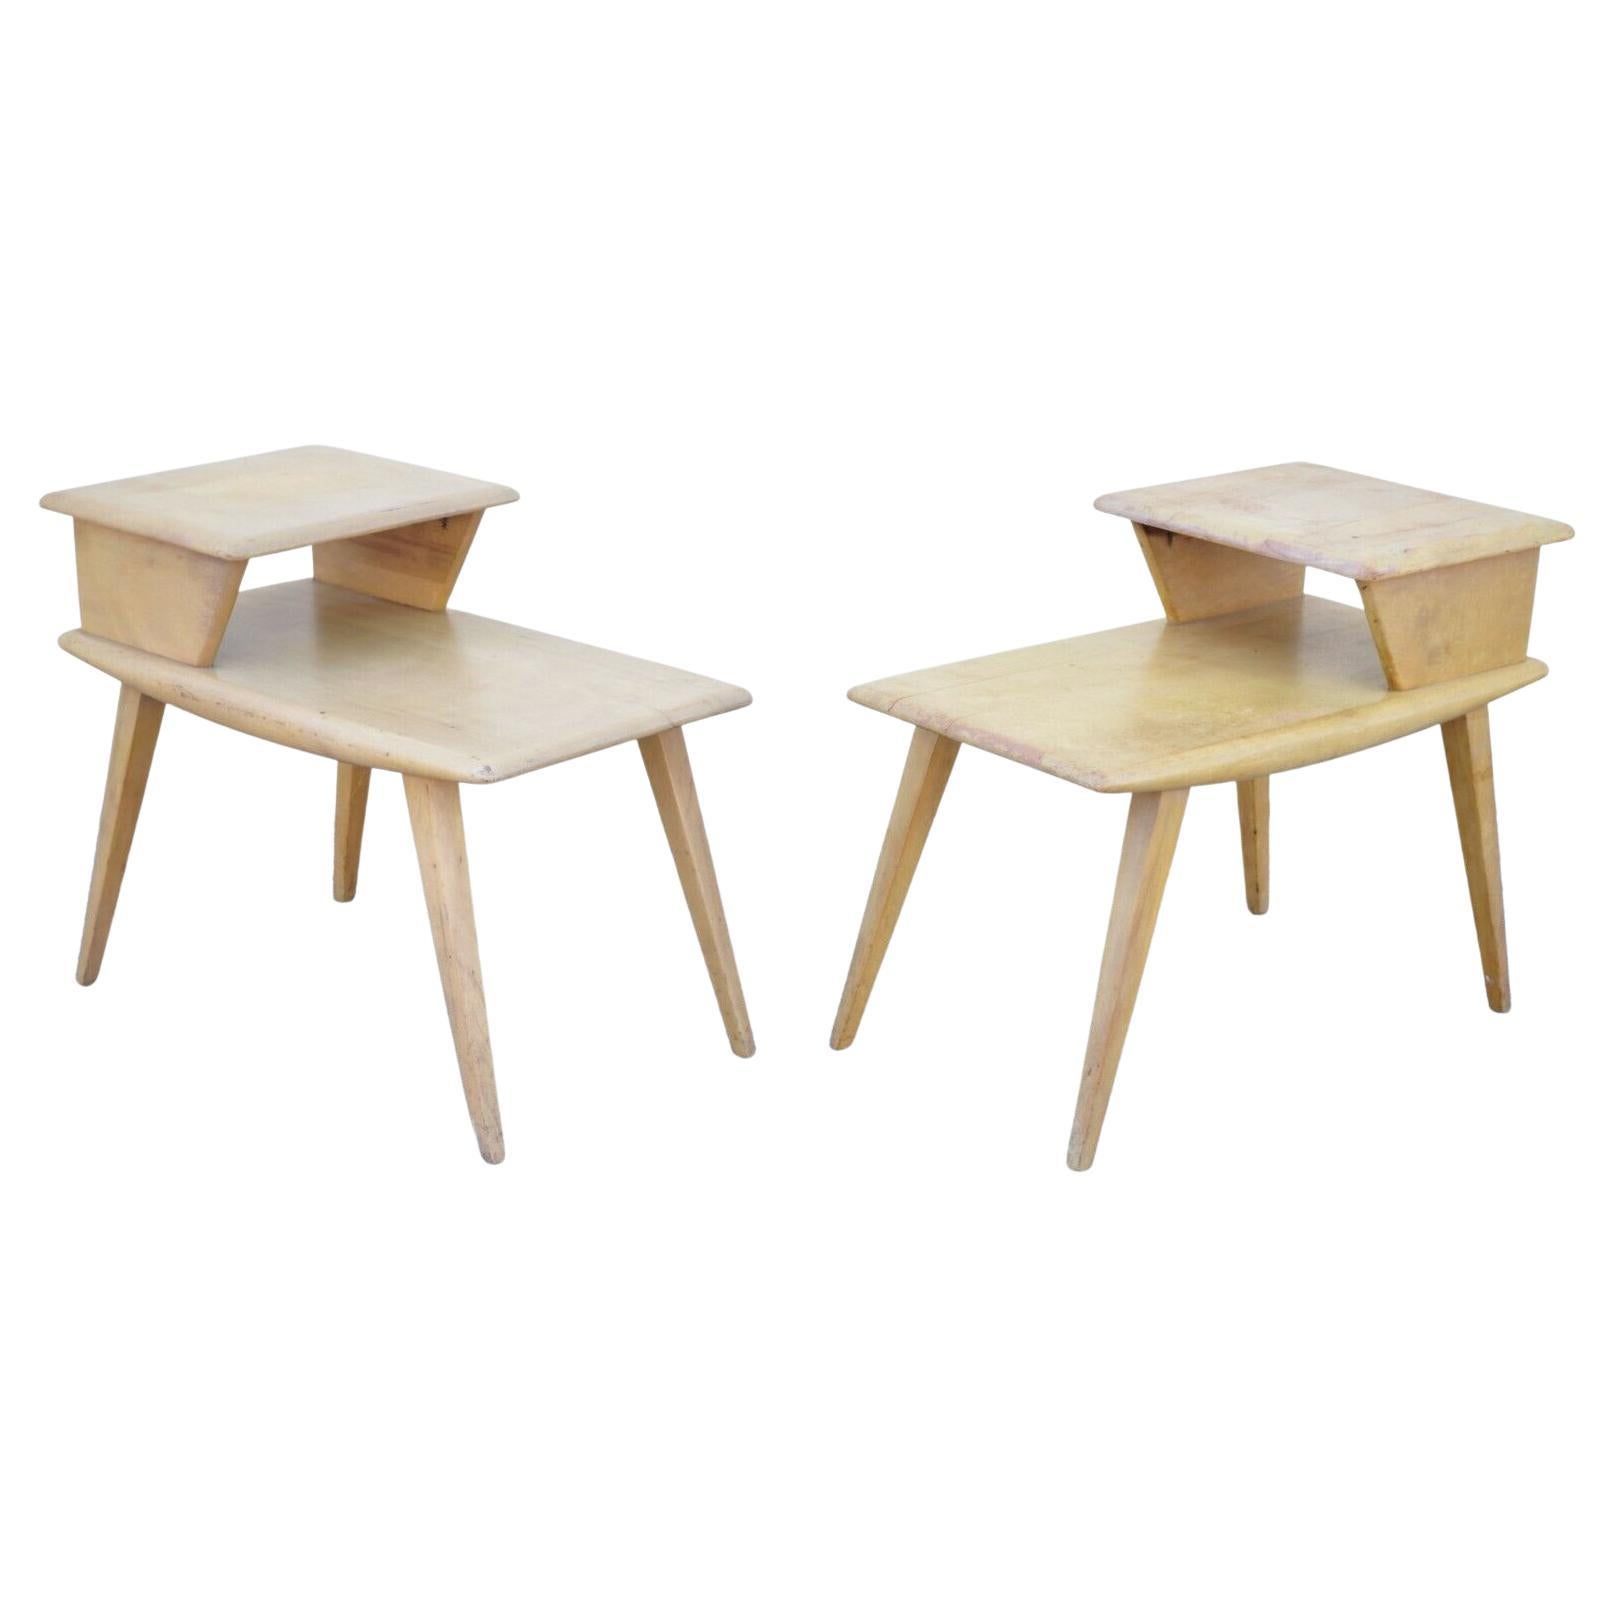 Vintage Heywood Wakefield Birch Maple Champagne Step End Tables, a Pair For Sale